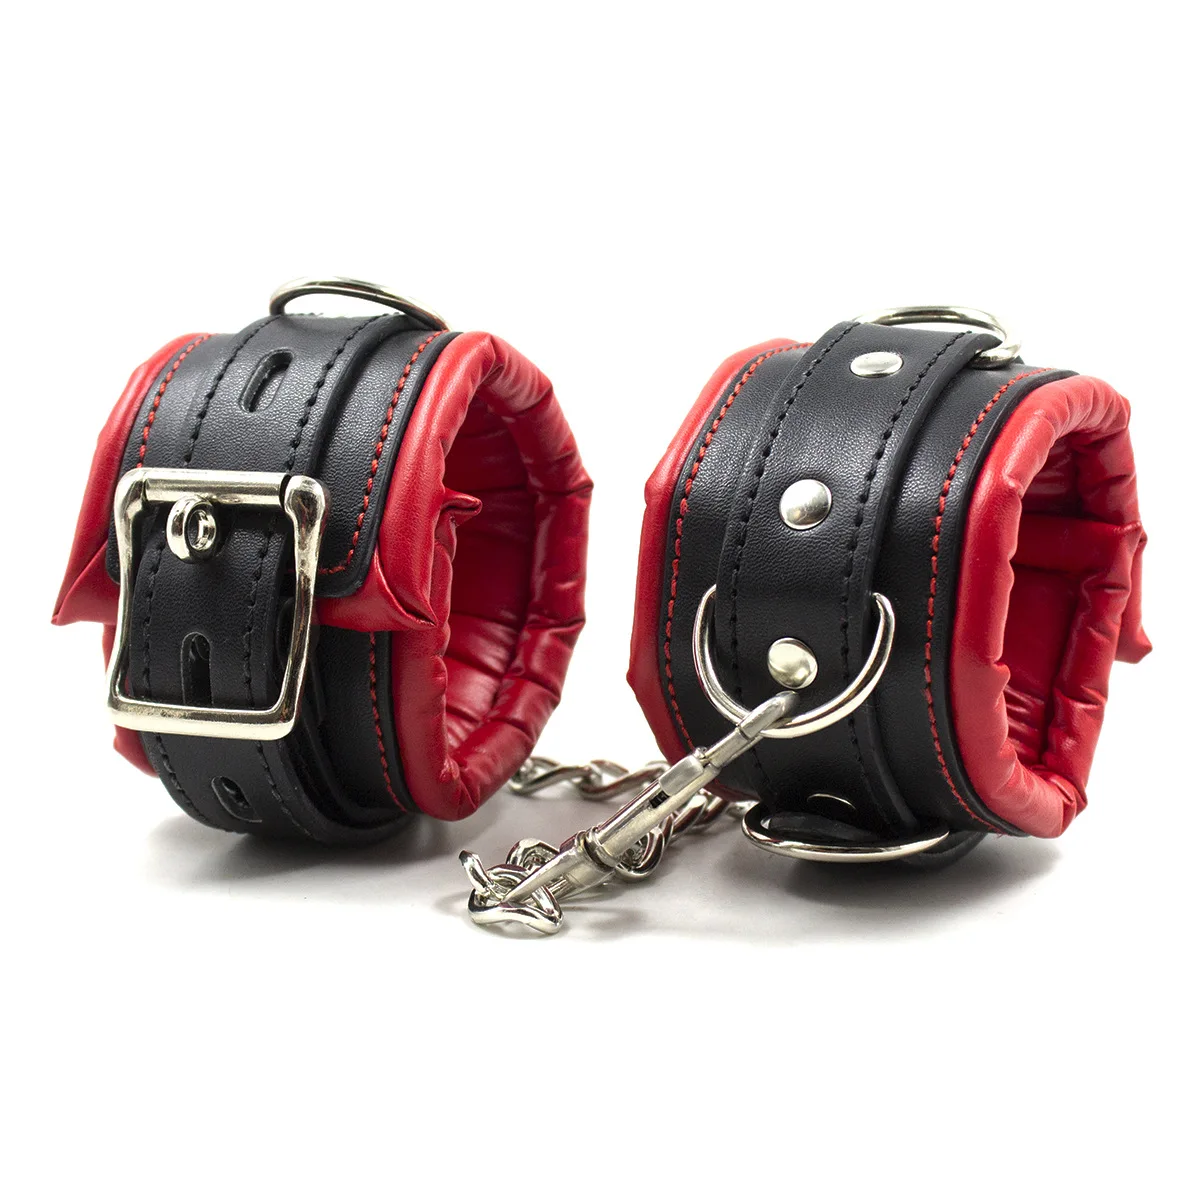 High Quality Bdsm Toys Leather Bondage Handcuff Slave Bdsm Wrist Cuffs For Hands And Feet